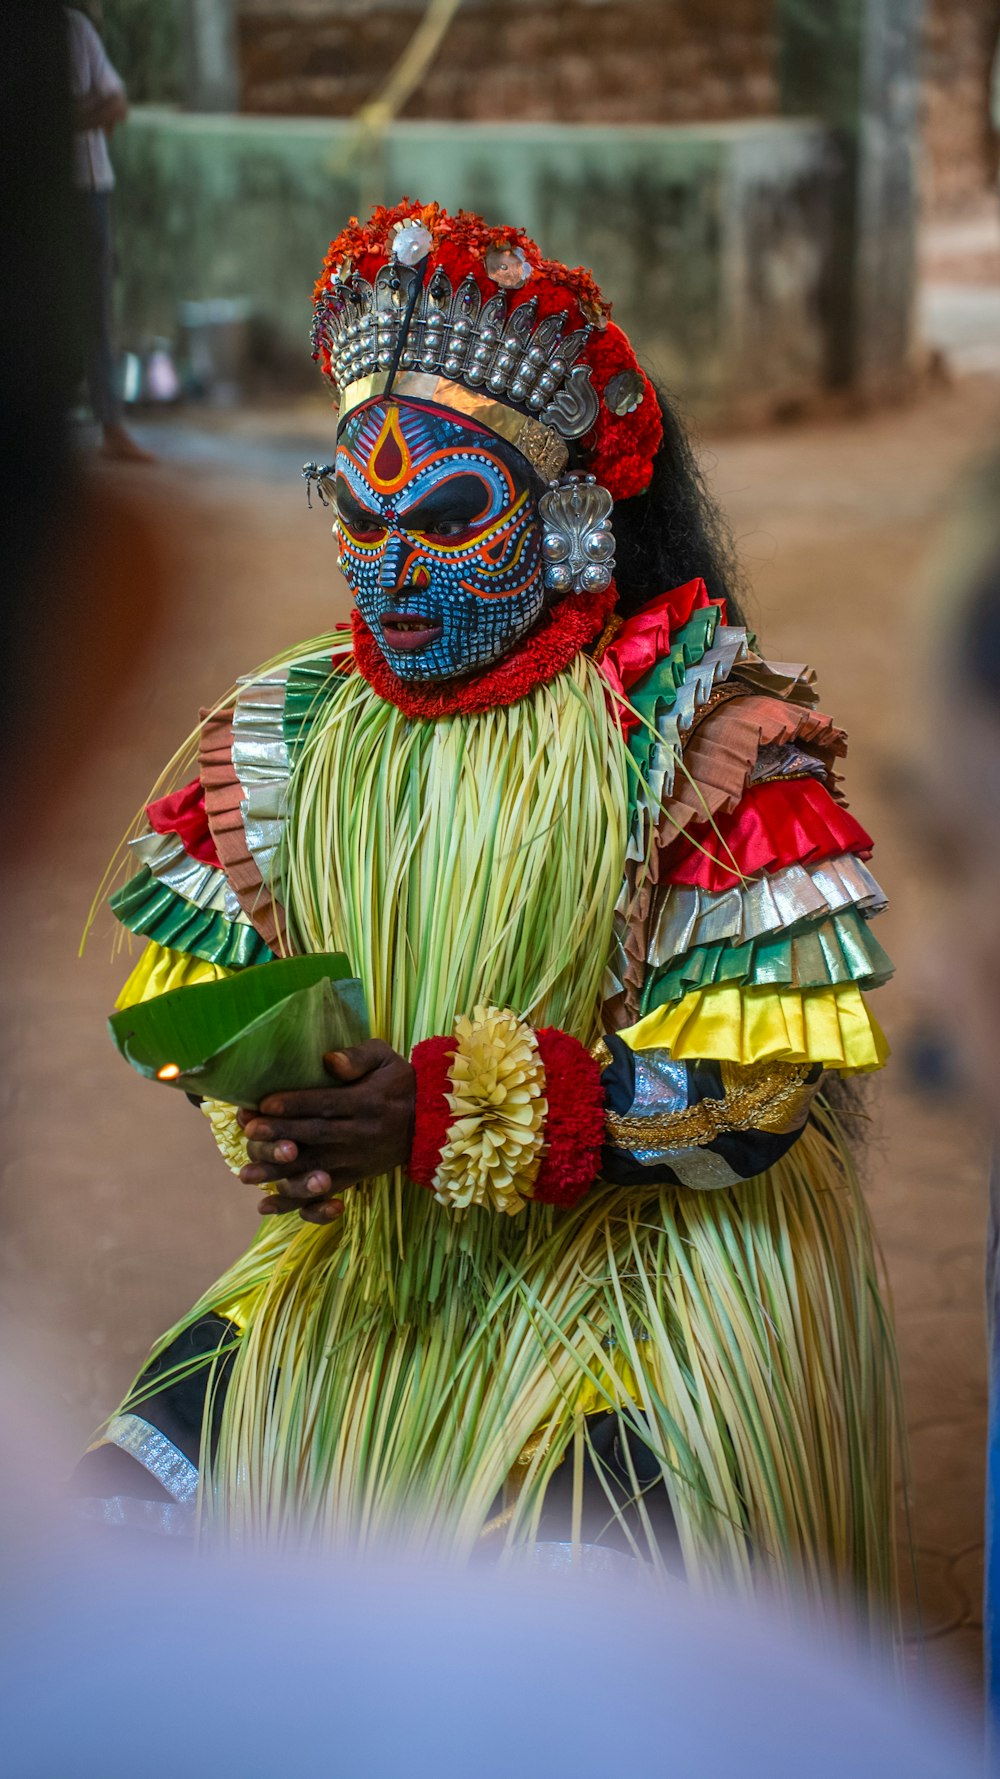 a woman dressed in a colorful costume and headdress